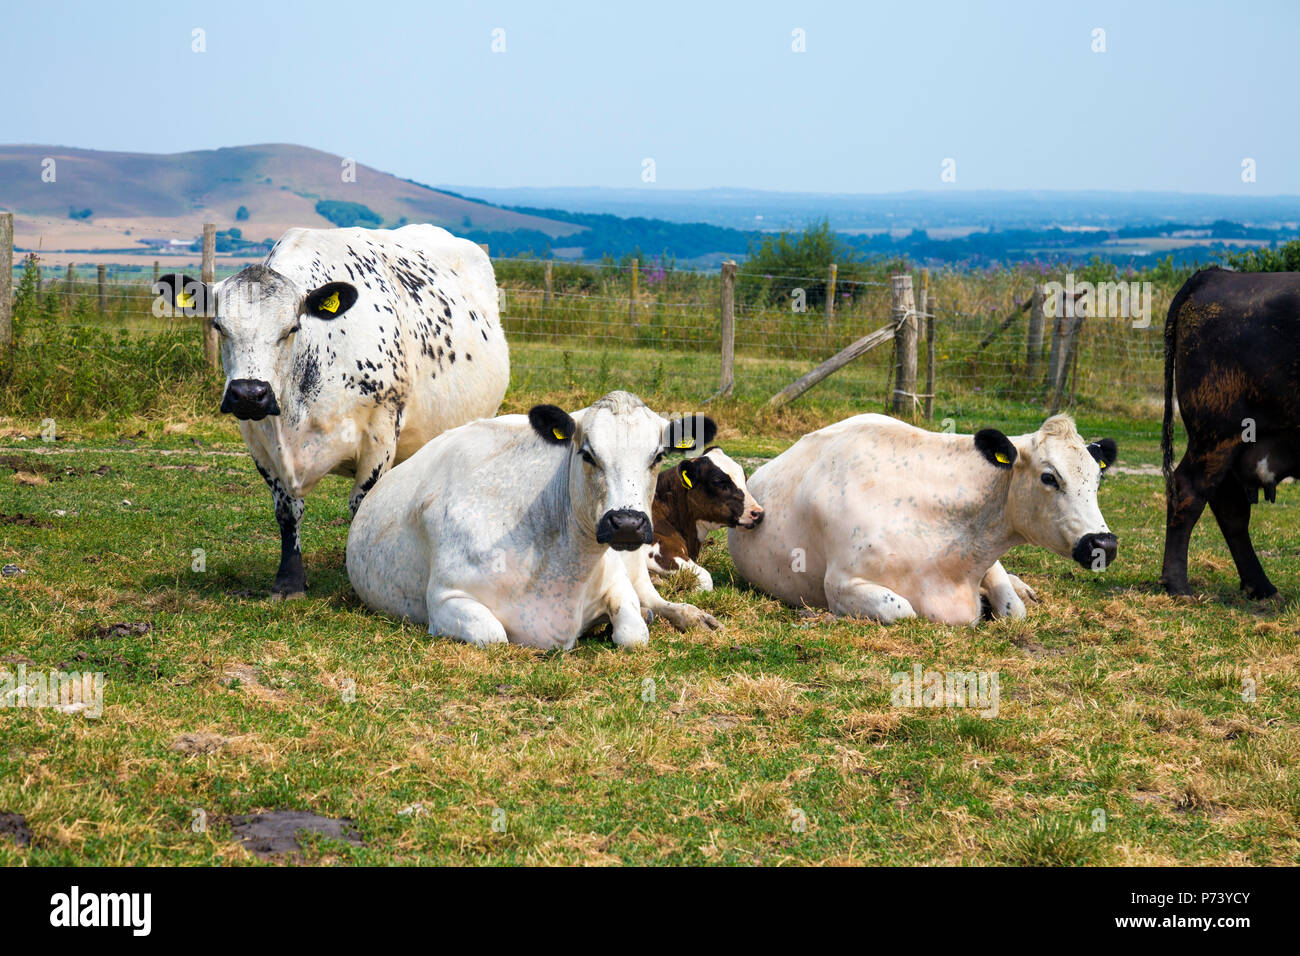 Cows resting and grazing in a field in South Downs National Park, East Sussex, UK Stock Photo